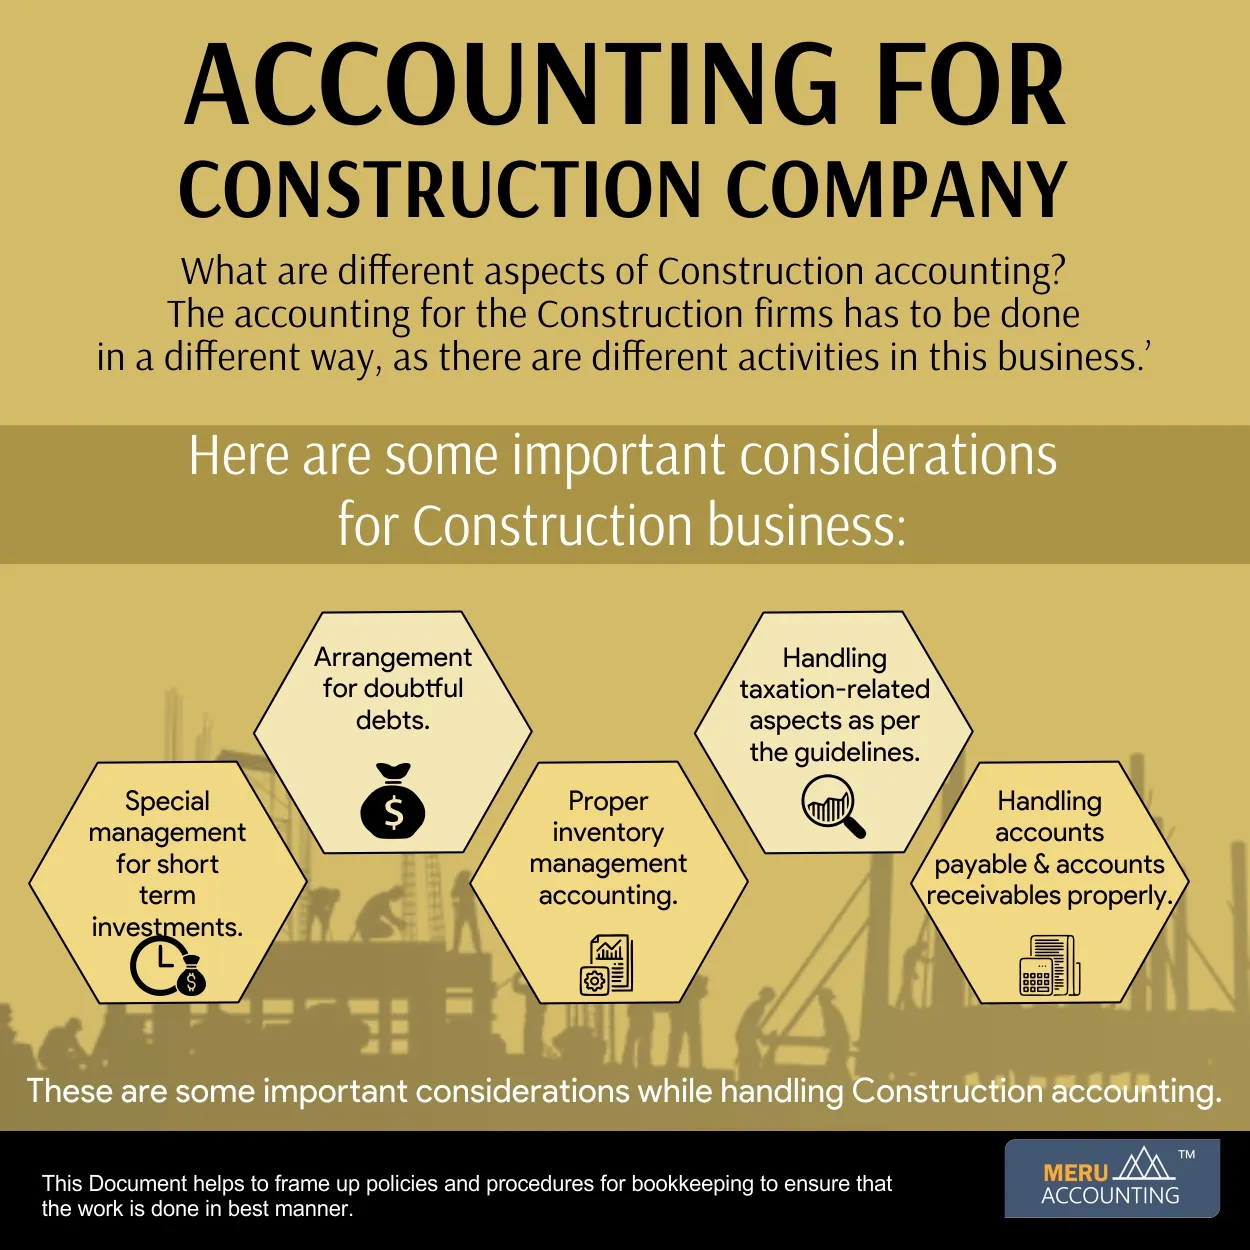 Accounting for construction